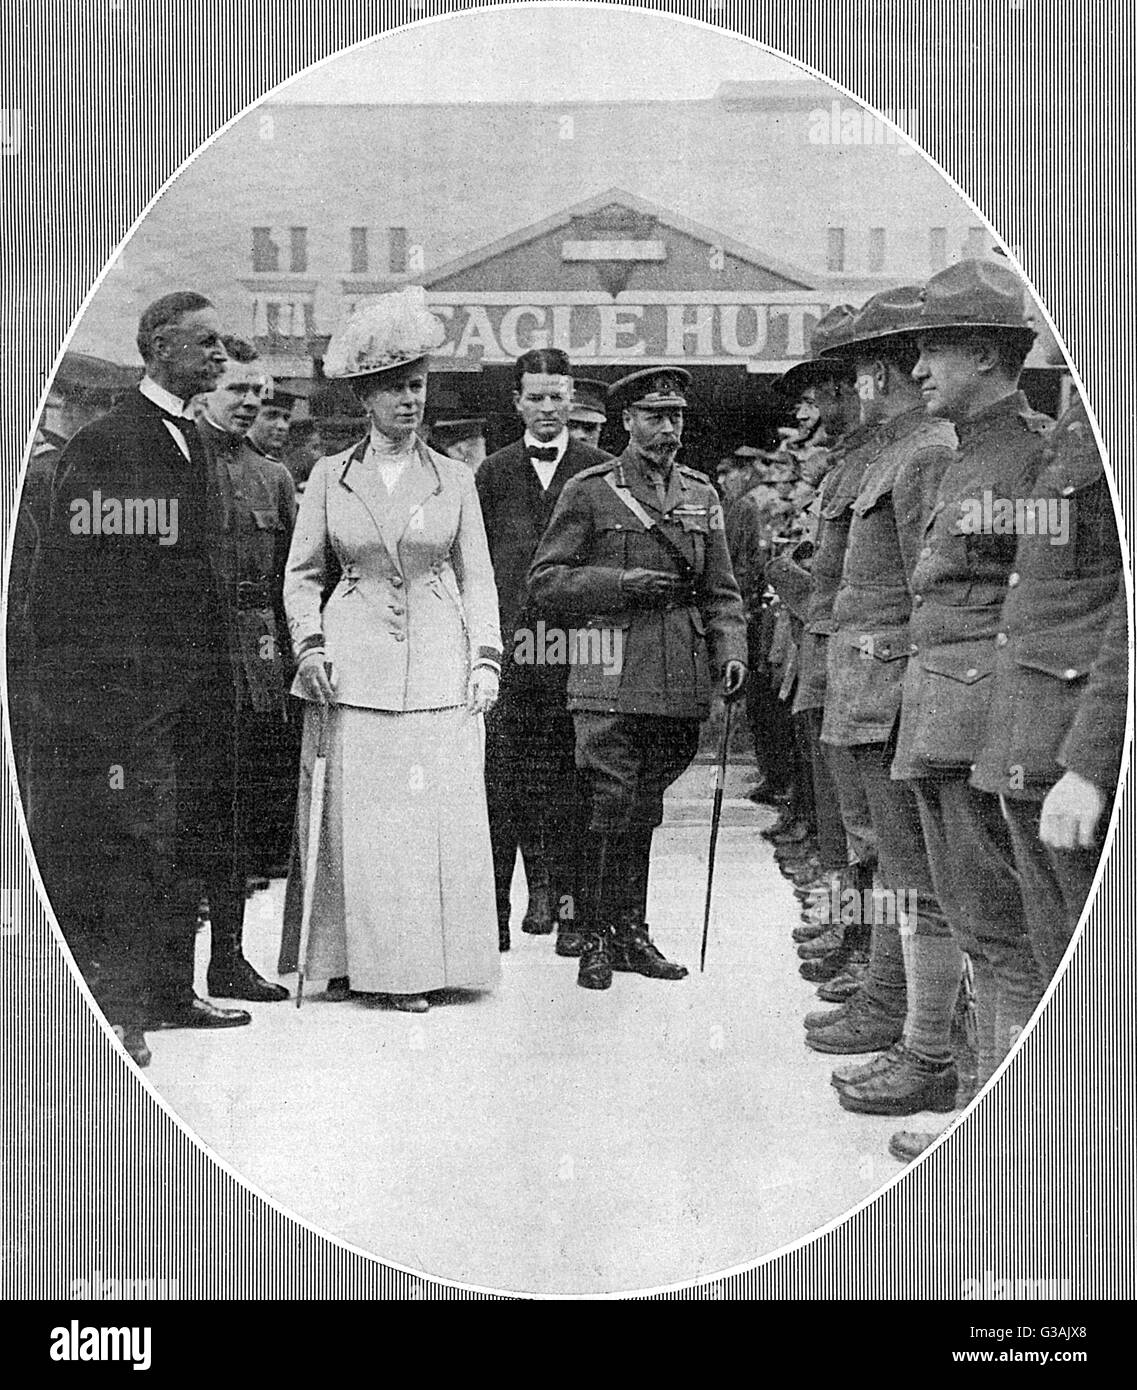 King George V and Queen Mary inspect a guard of honour of American soldiers at the Eagle Hut in Aldwych in July 1918 in honour of Independence Day.  The YMCA supplied British servicemen away from home in the UK and overseas with a place to eat, drink, rel Stock Photo